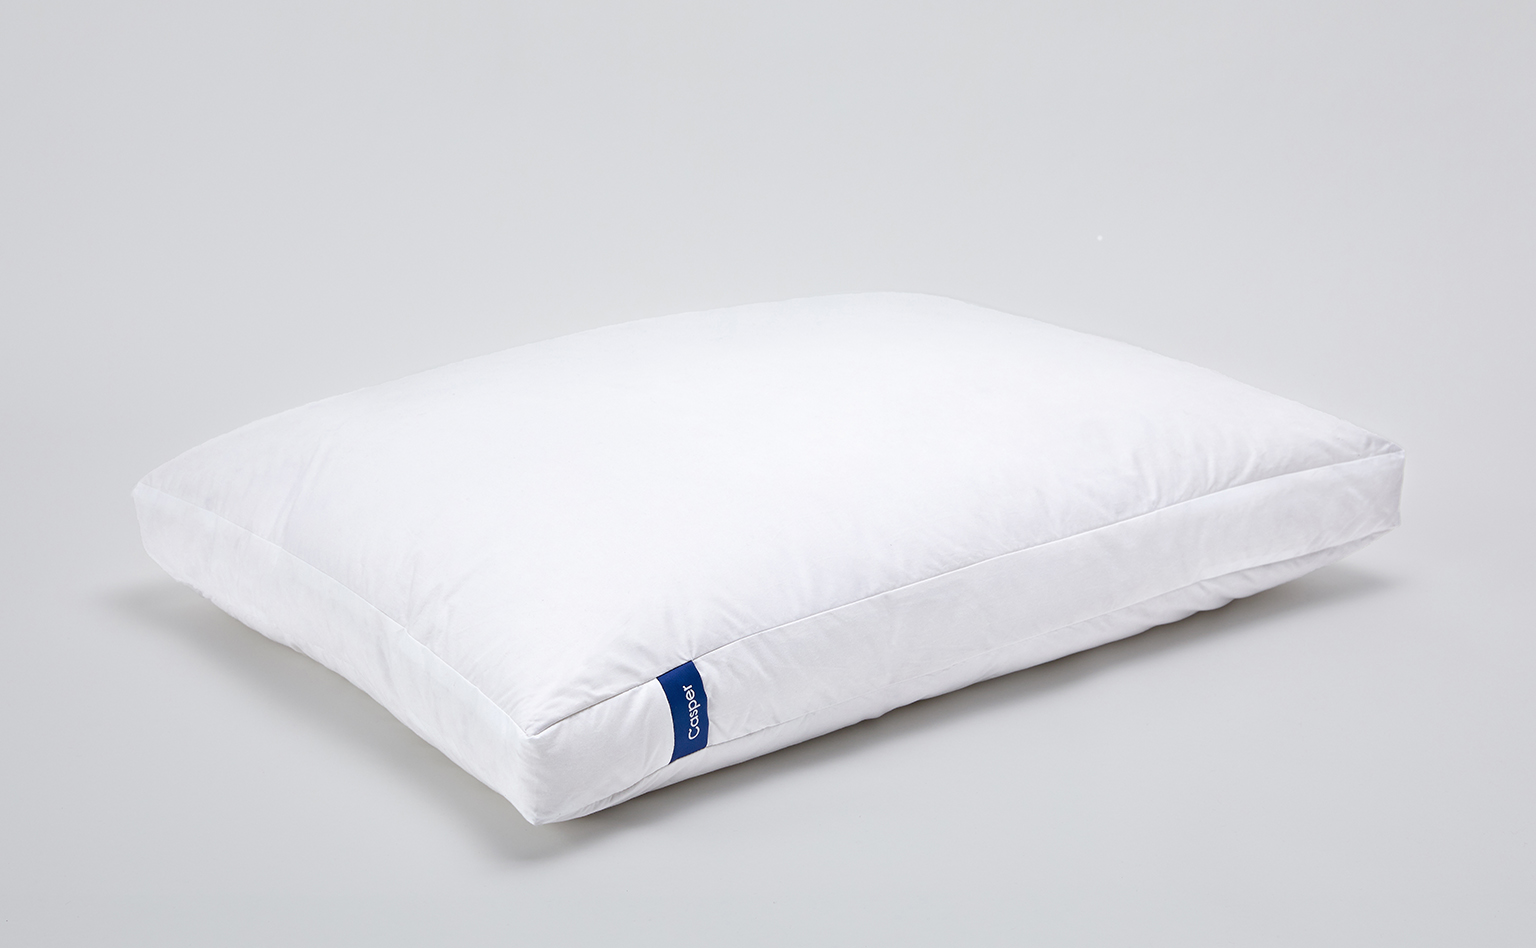 White **MSRP:65.00 Firm Details about   New Casper Nap Pillow for Sleeping Neck Pain 